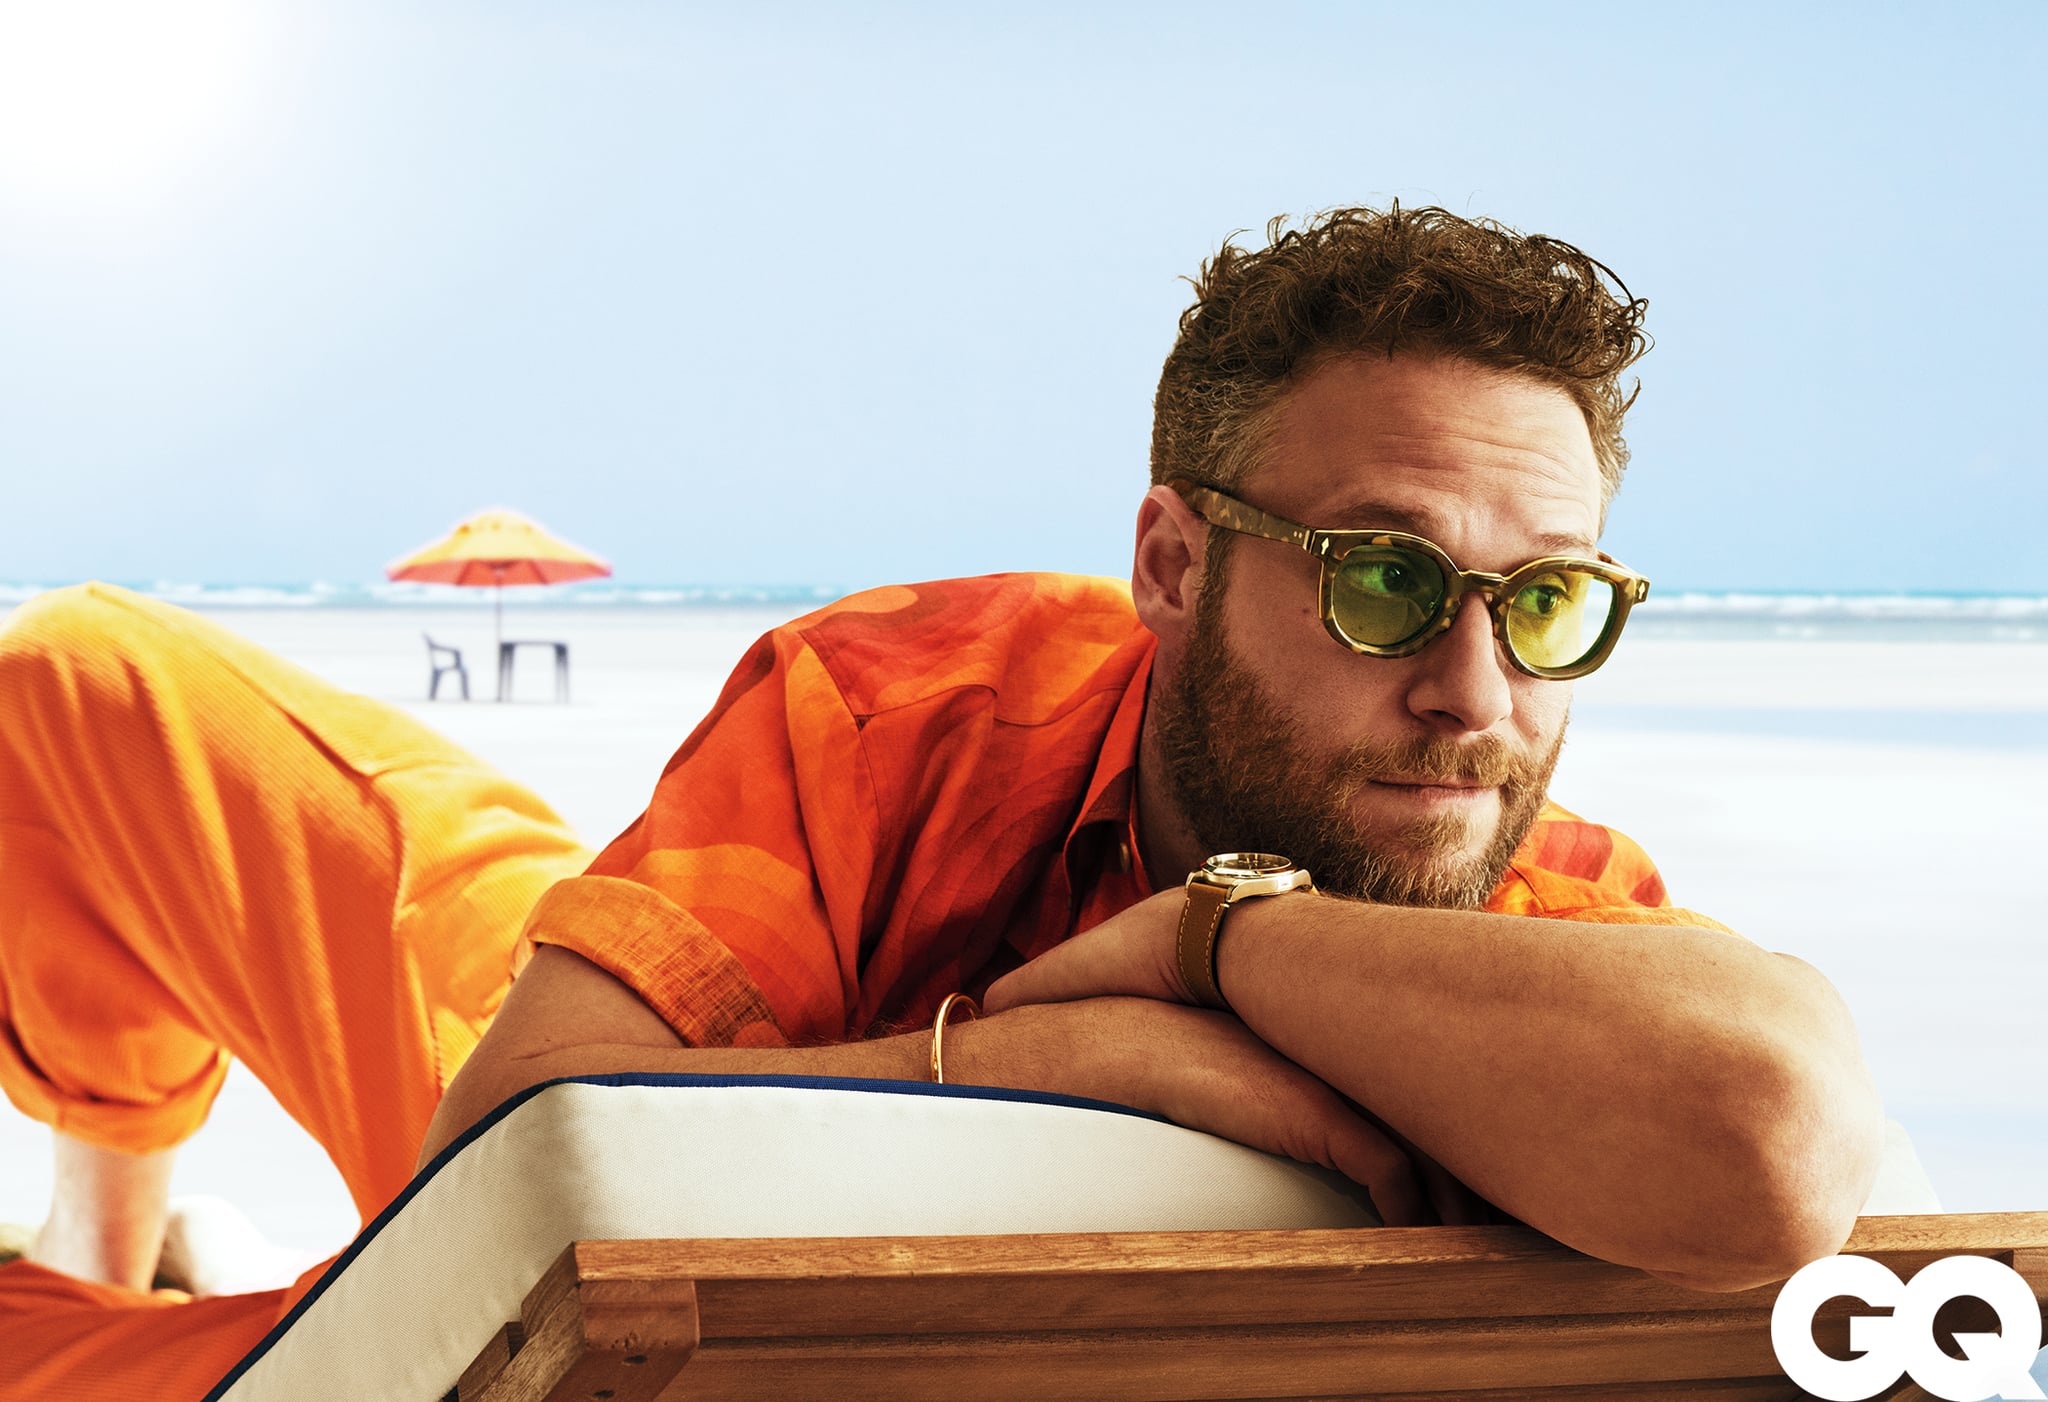 Reactions To Seth Rogen S Gq Pictures May 2019 Popsugar Celebrity